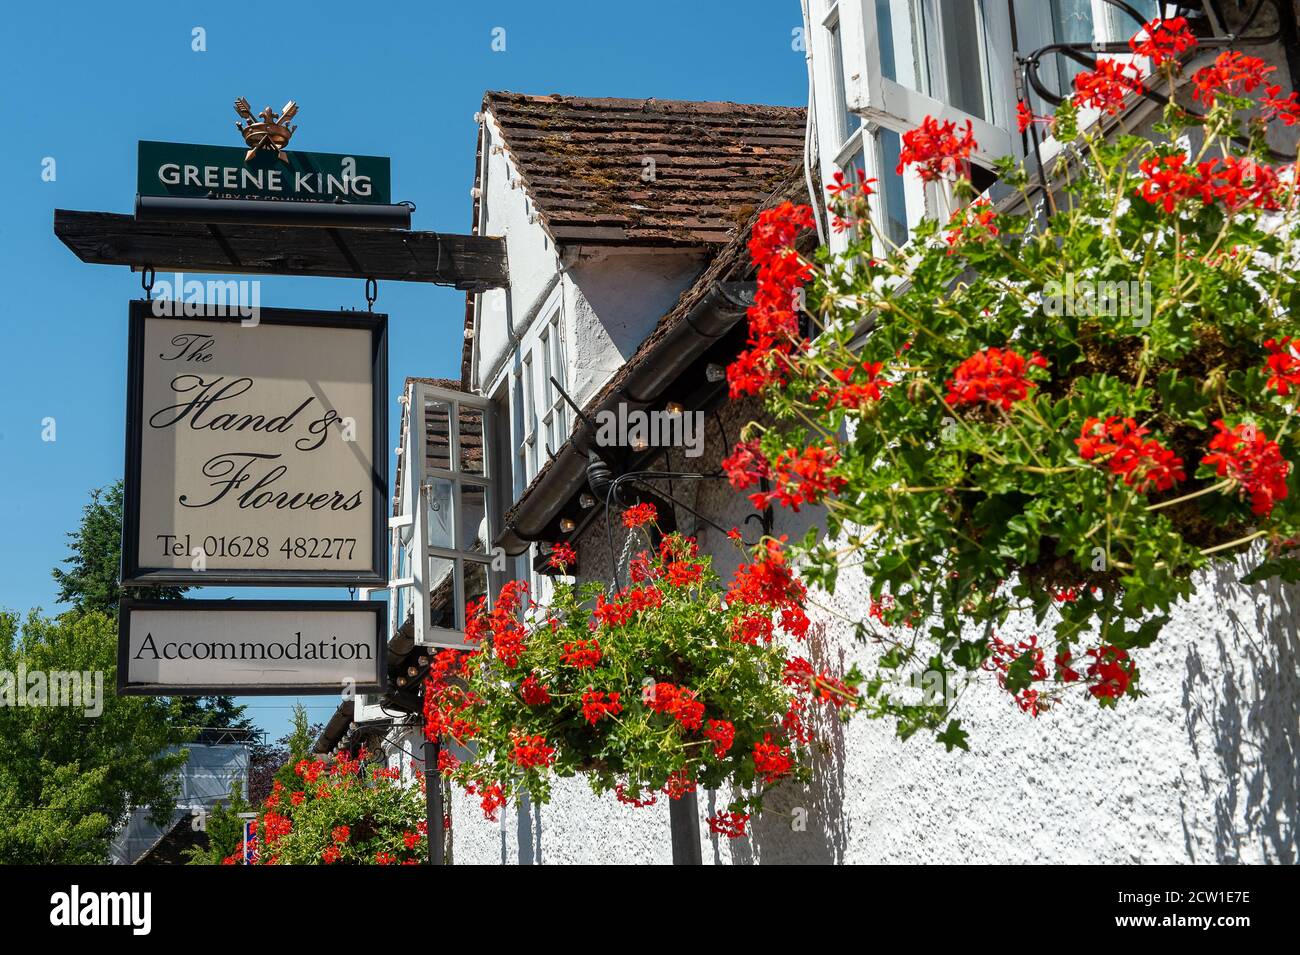 Marlow, Buckinghamshire, UK. 25th June, 2020. Celebrity Chef Tom Kerridge's Hand and Flowers inn, pub and restaurant in Marlow, Buckinghamshire are getting ready to reopen from 4th July 2020 following the easing of the Coronavirus Covid-19 Pandemic lockdown rules. Credit: Maureen McLean/Alamy Stock Photo